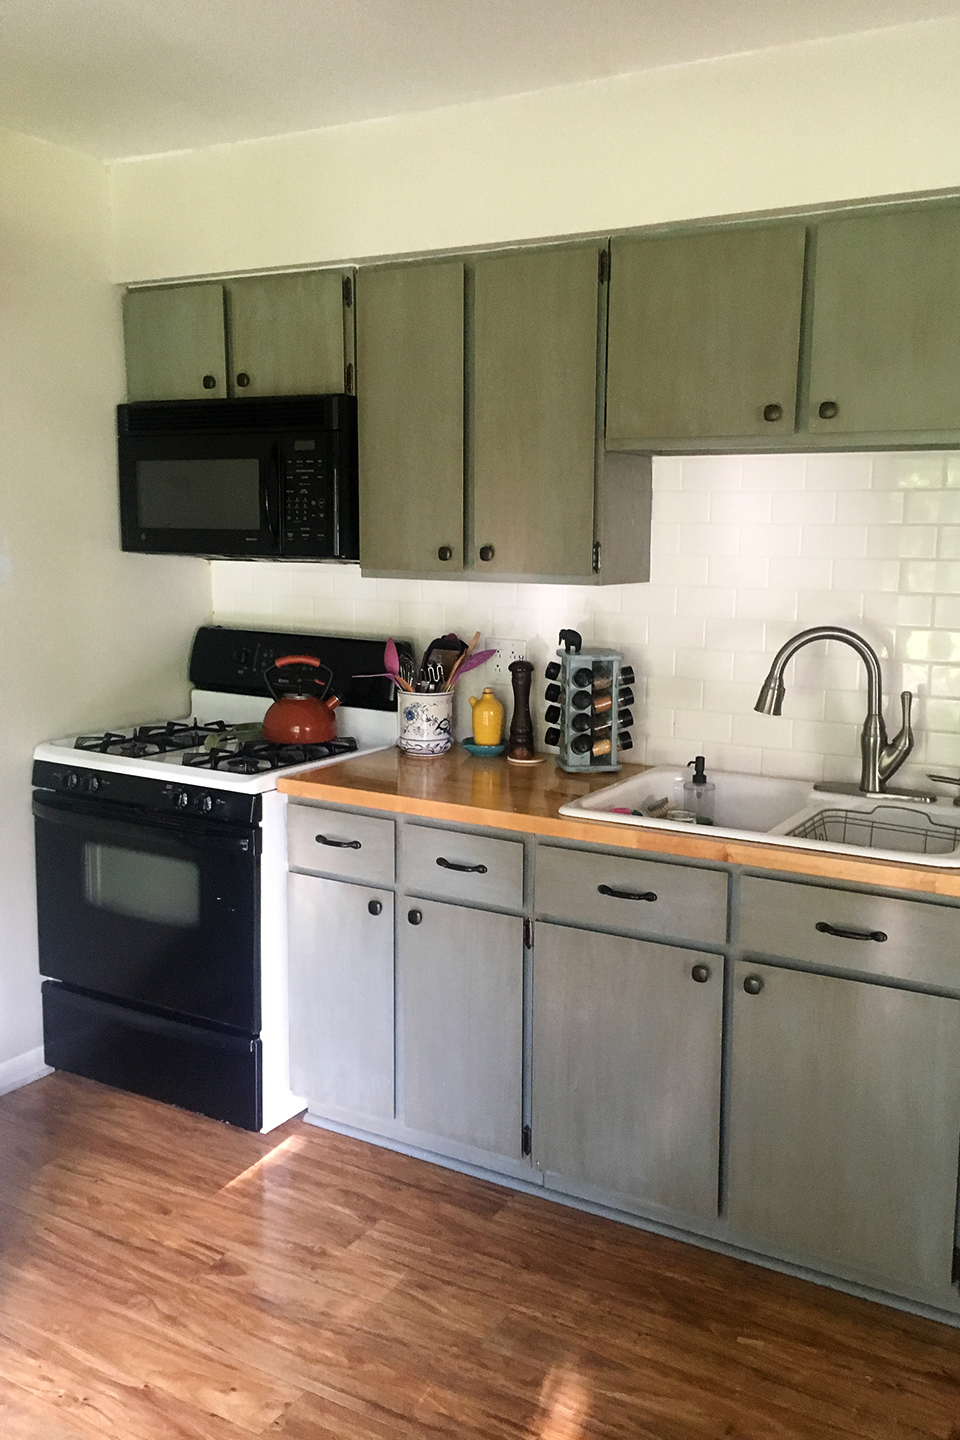 A Cheap and Cheerful Kitchen Cabinet Makeover - Rambling Renovators